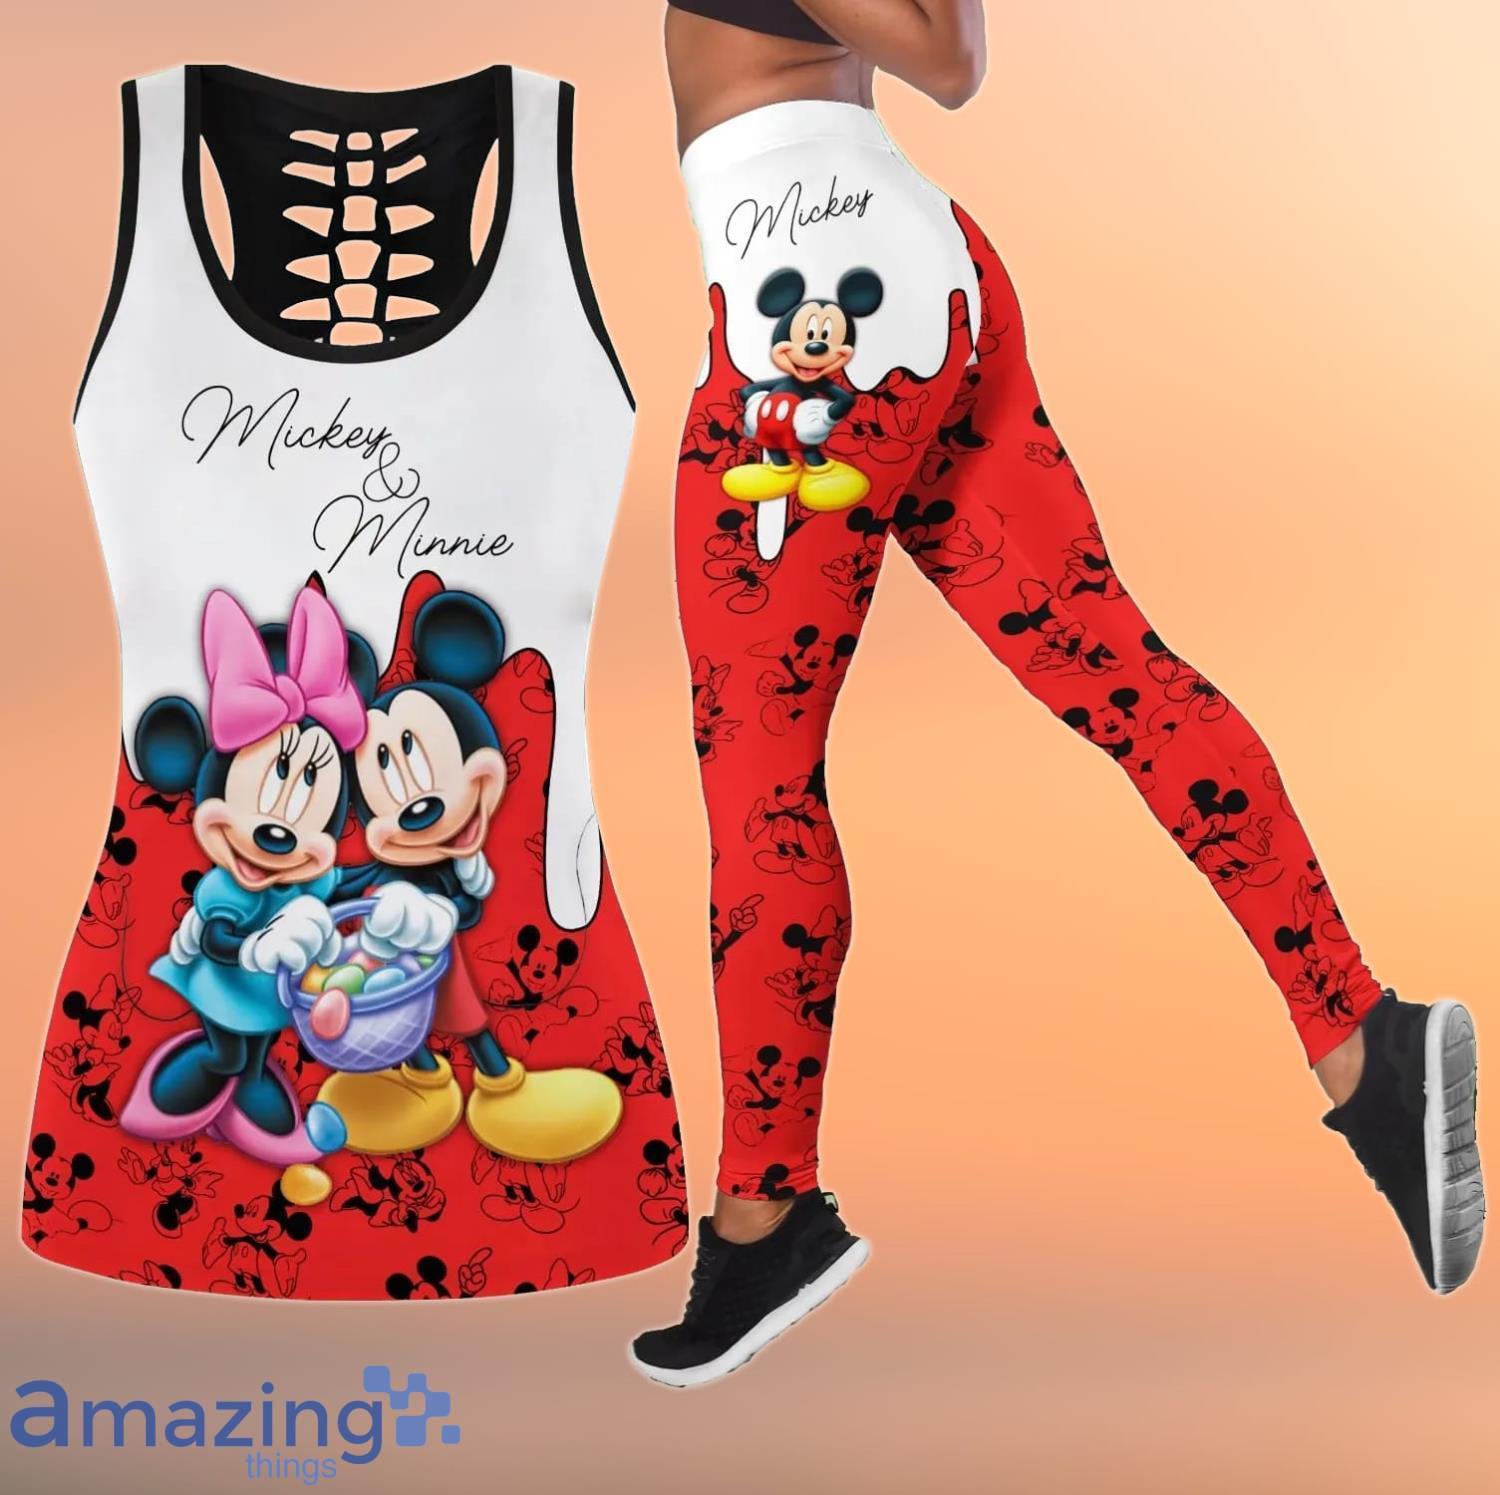 https://image.whatamazingthings.com/2023/03/minnie-mouse-mickey-mouse-combo-leggings-and-hollow-tank-top.jpg